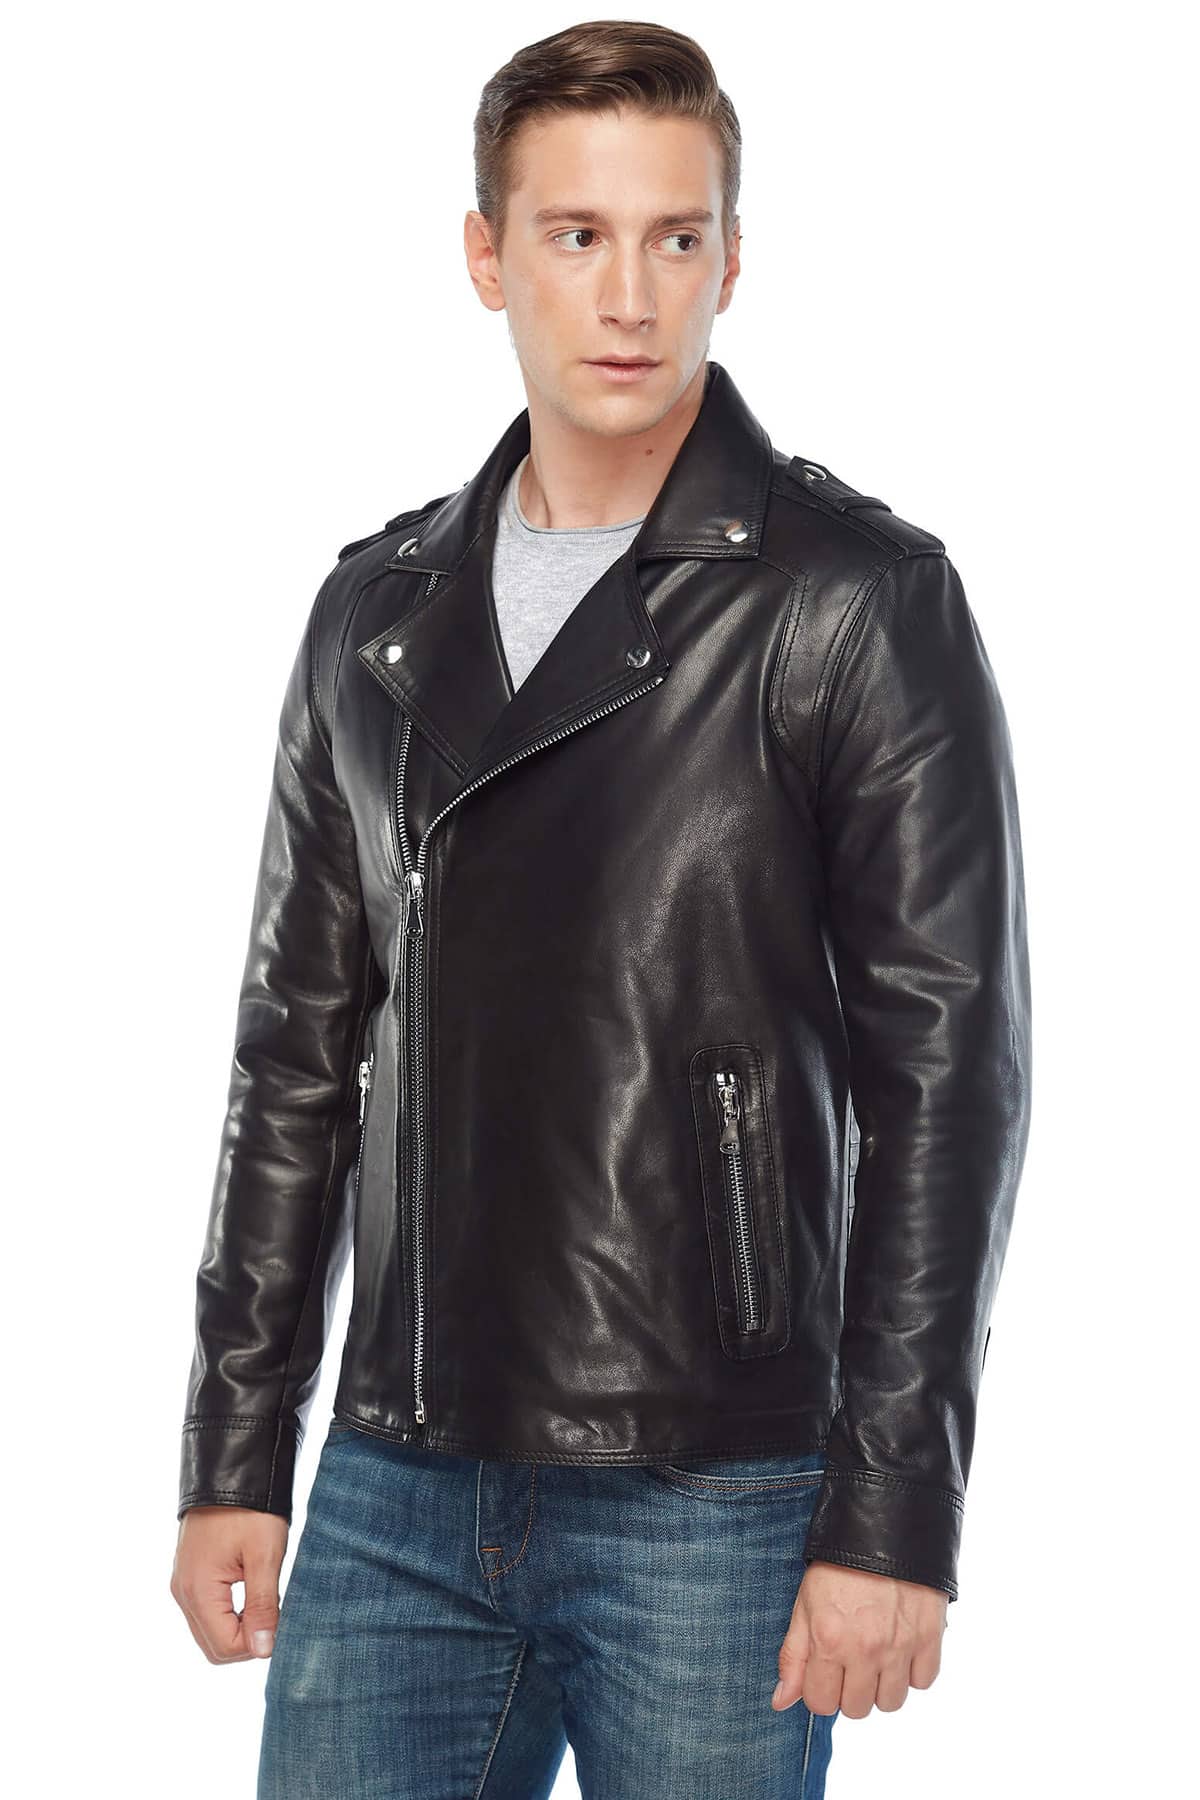 side Plausible as a result You've Searched for Mens Biker Genuine Leather Jacket Black